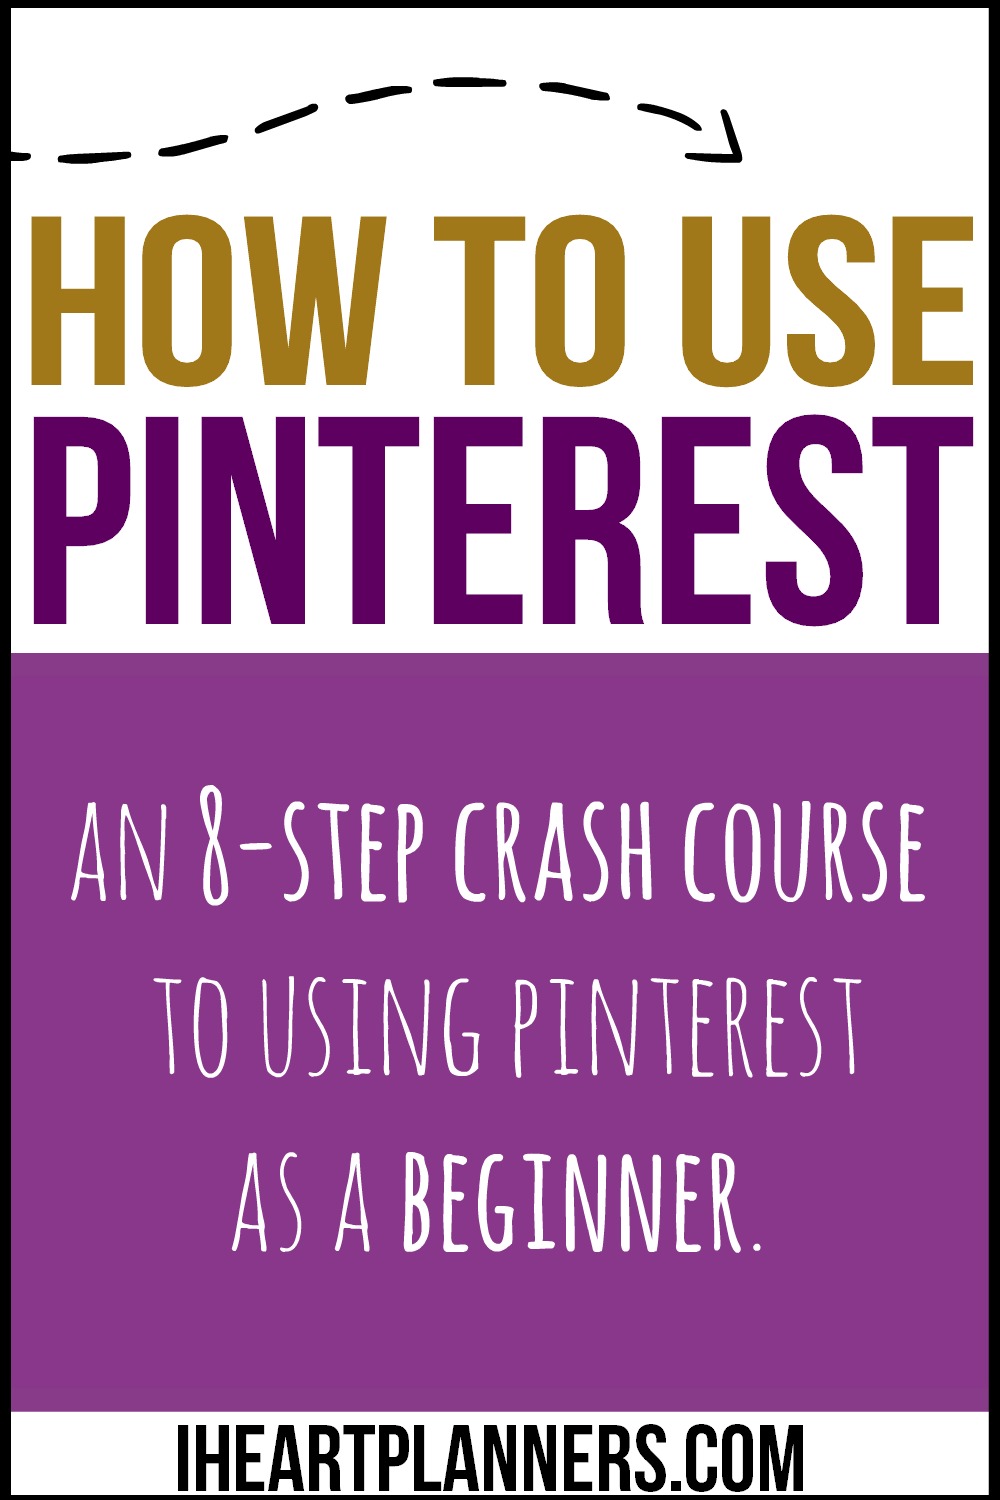 New to Pinterest? Here is a quick, 8-step crash course in everything Pinterest for beginners. This easy to follow guide includes a video to walk you through using Pinterest. A must for any newbie!